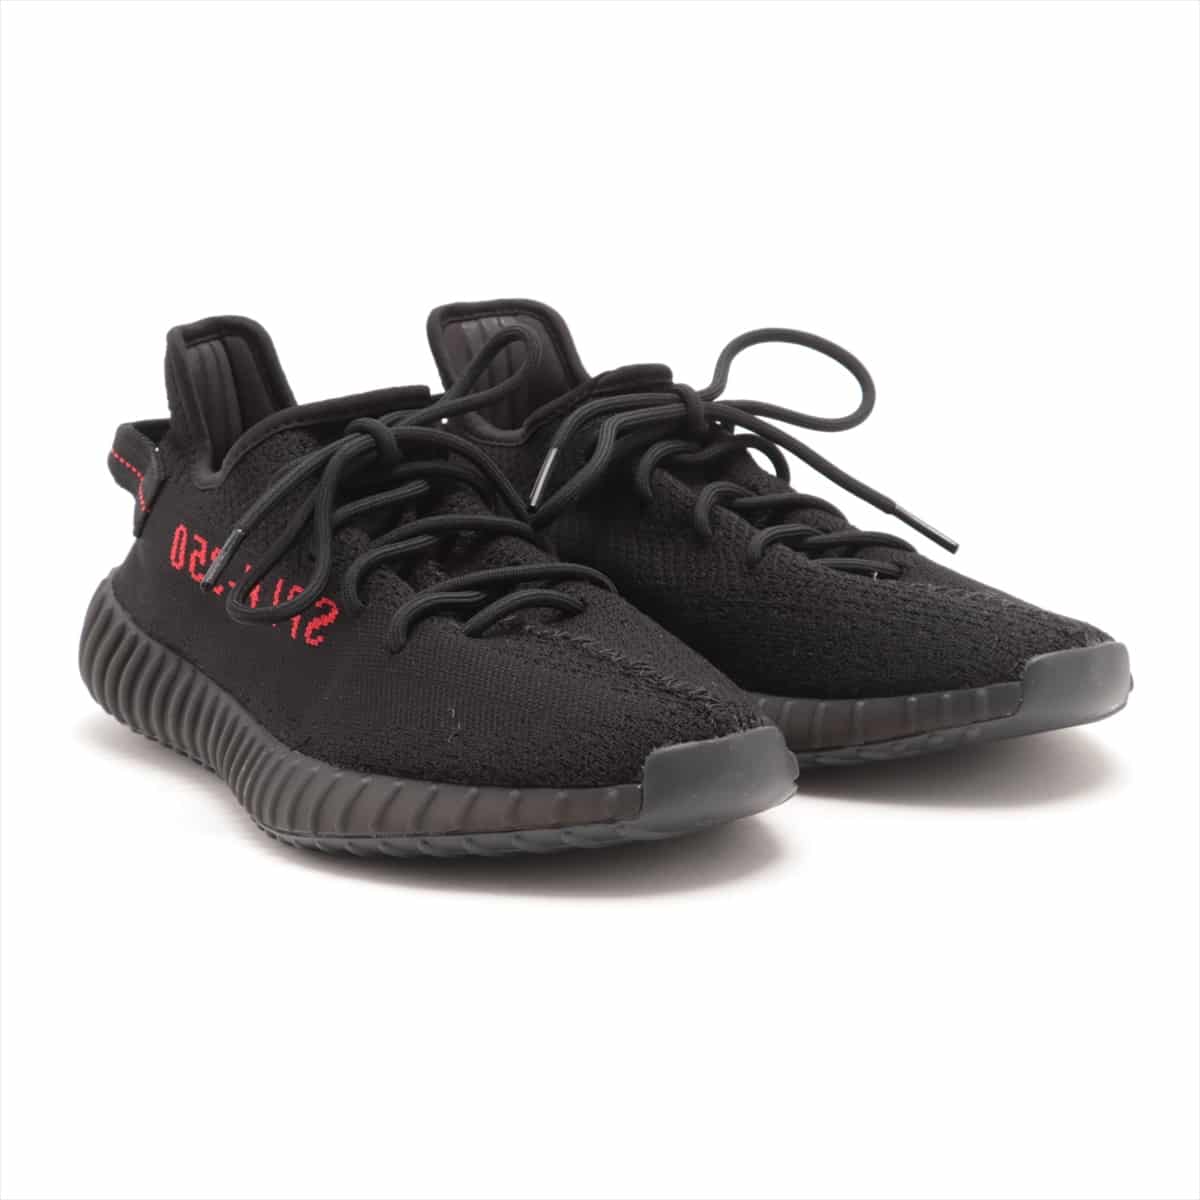 Adidas YEEZY BOOST 350 V2 Knit Sneakers 29cm Men's Black CP9652